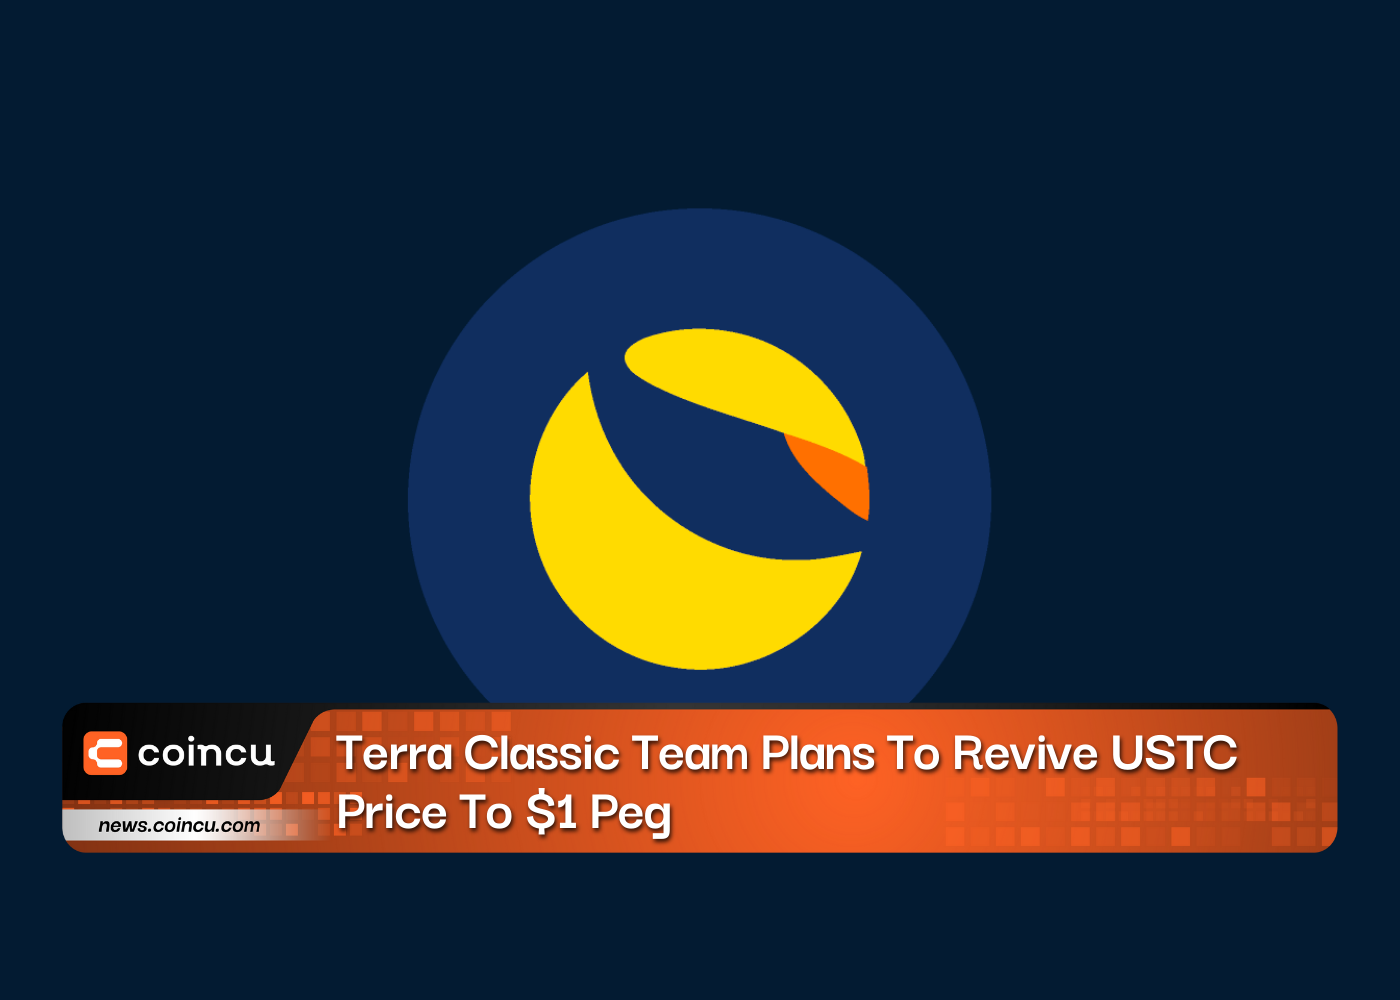 Terra Classic Team Plans To Revive USTC Price To $1 Peg